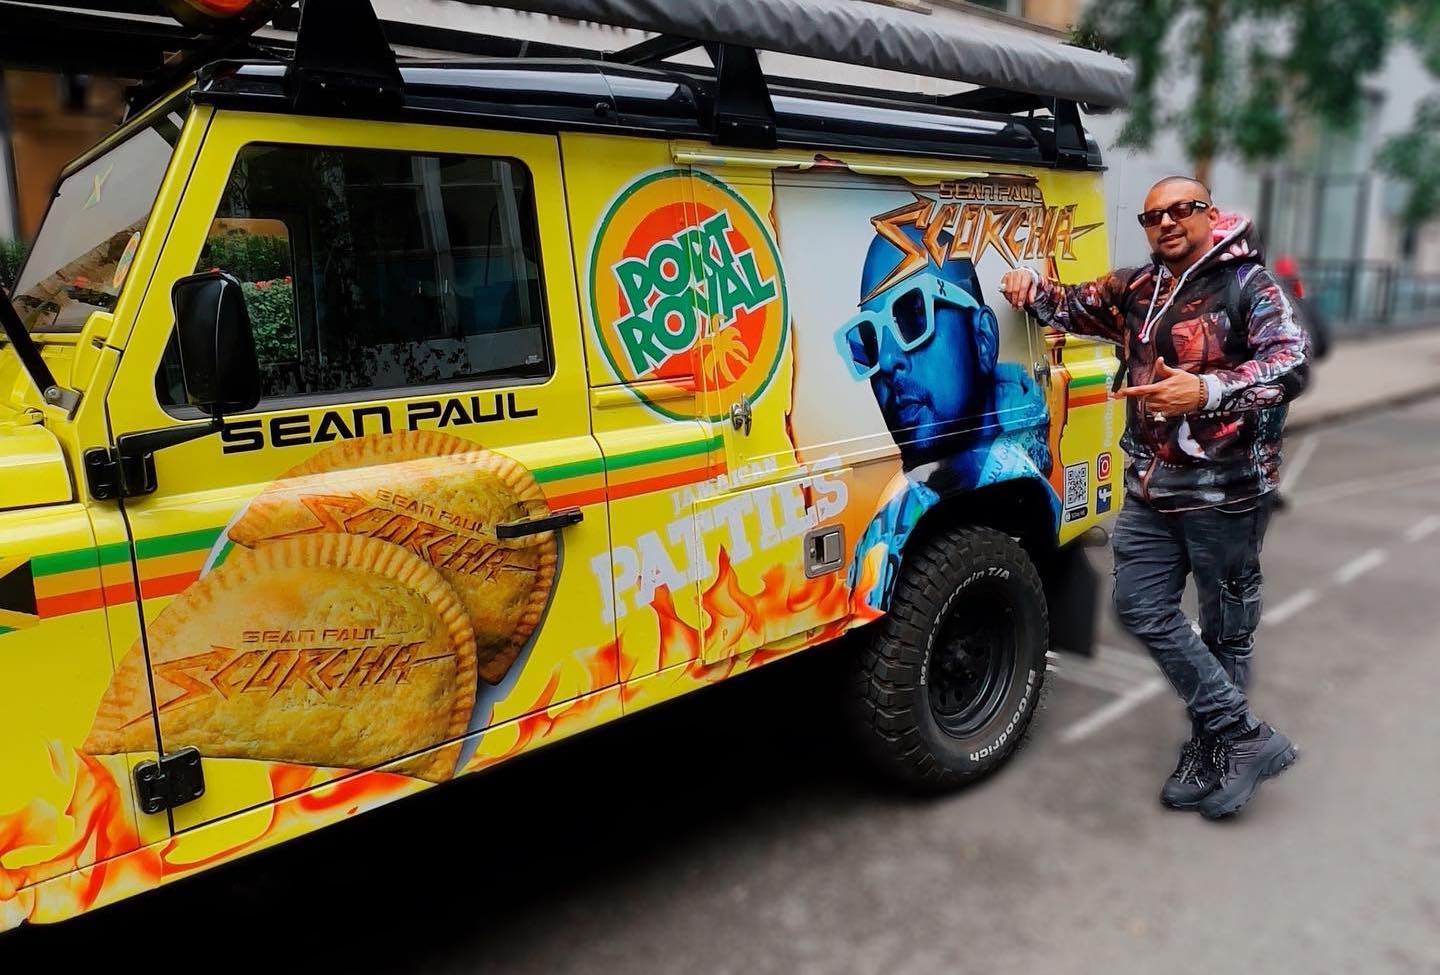 Sean Paul releases “Scorcha” Jamaican patties and hot sauce